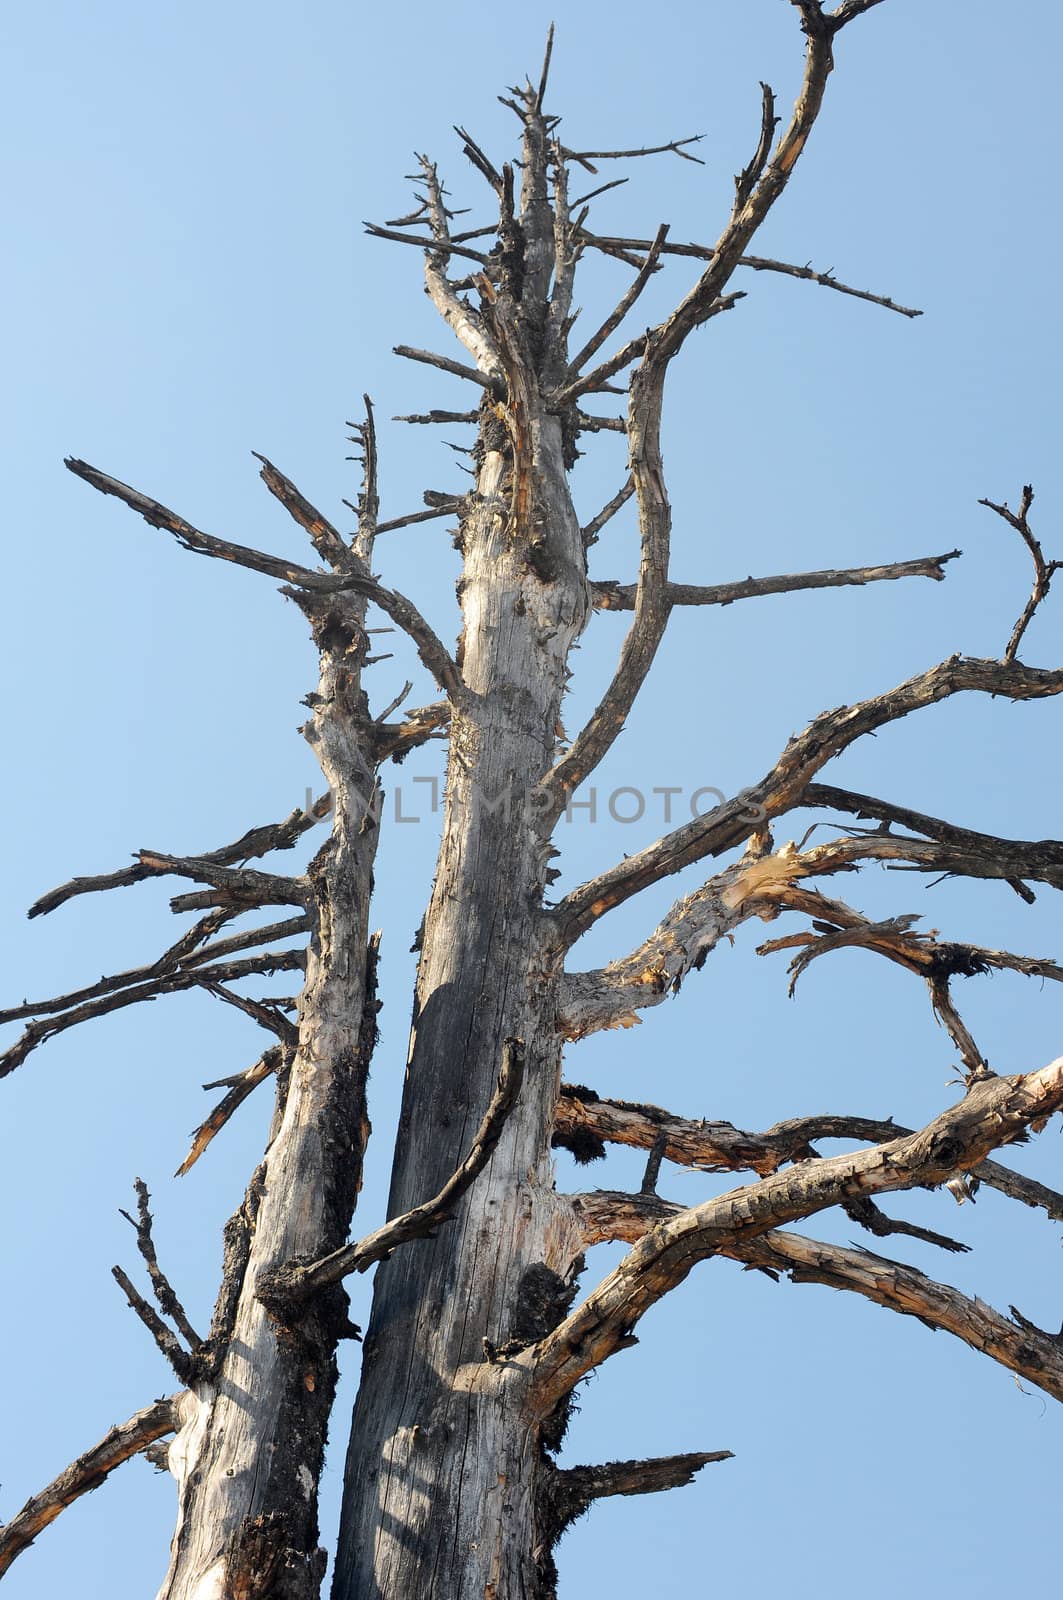 Dead tree trunks and branches against blue sky